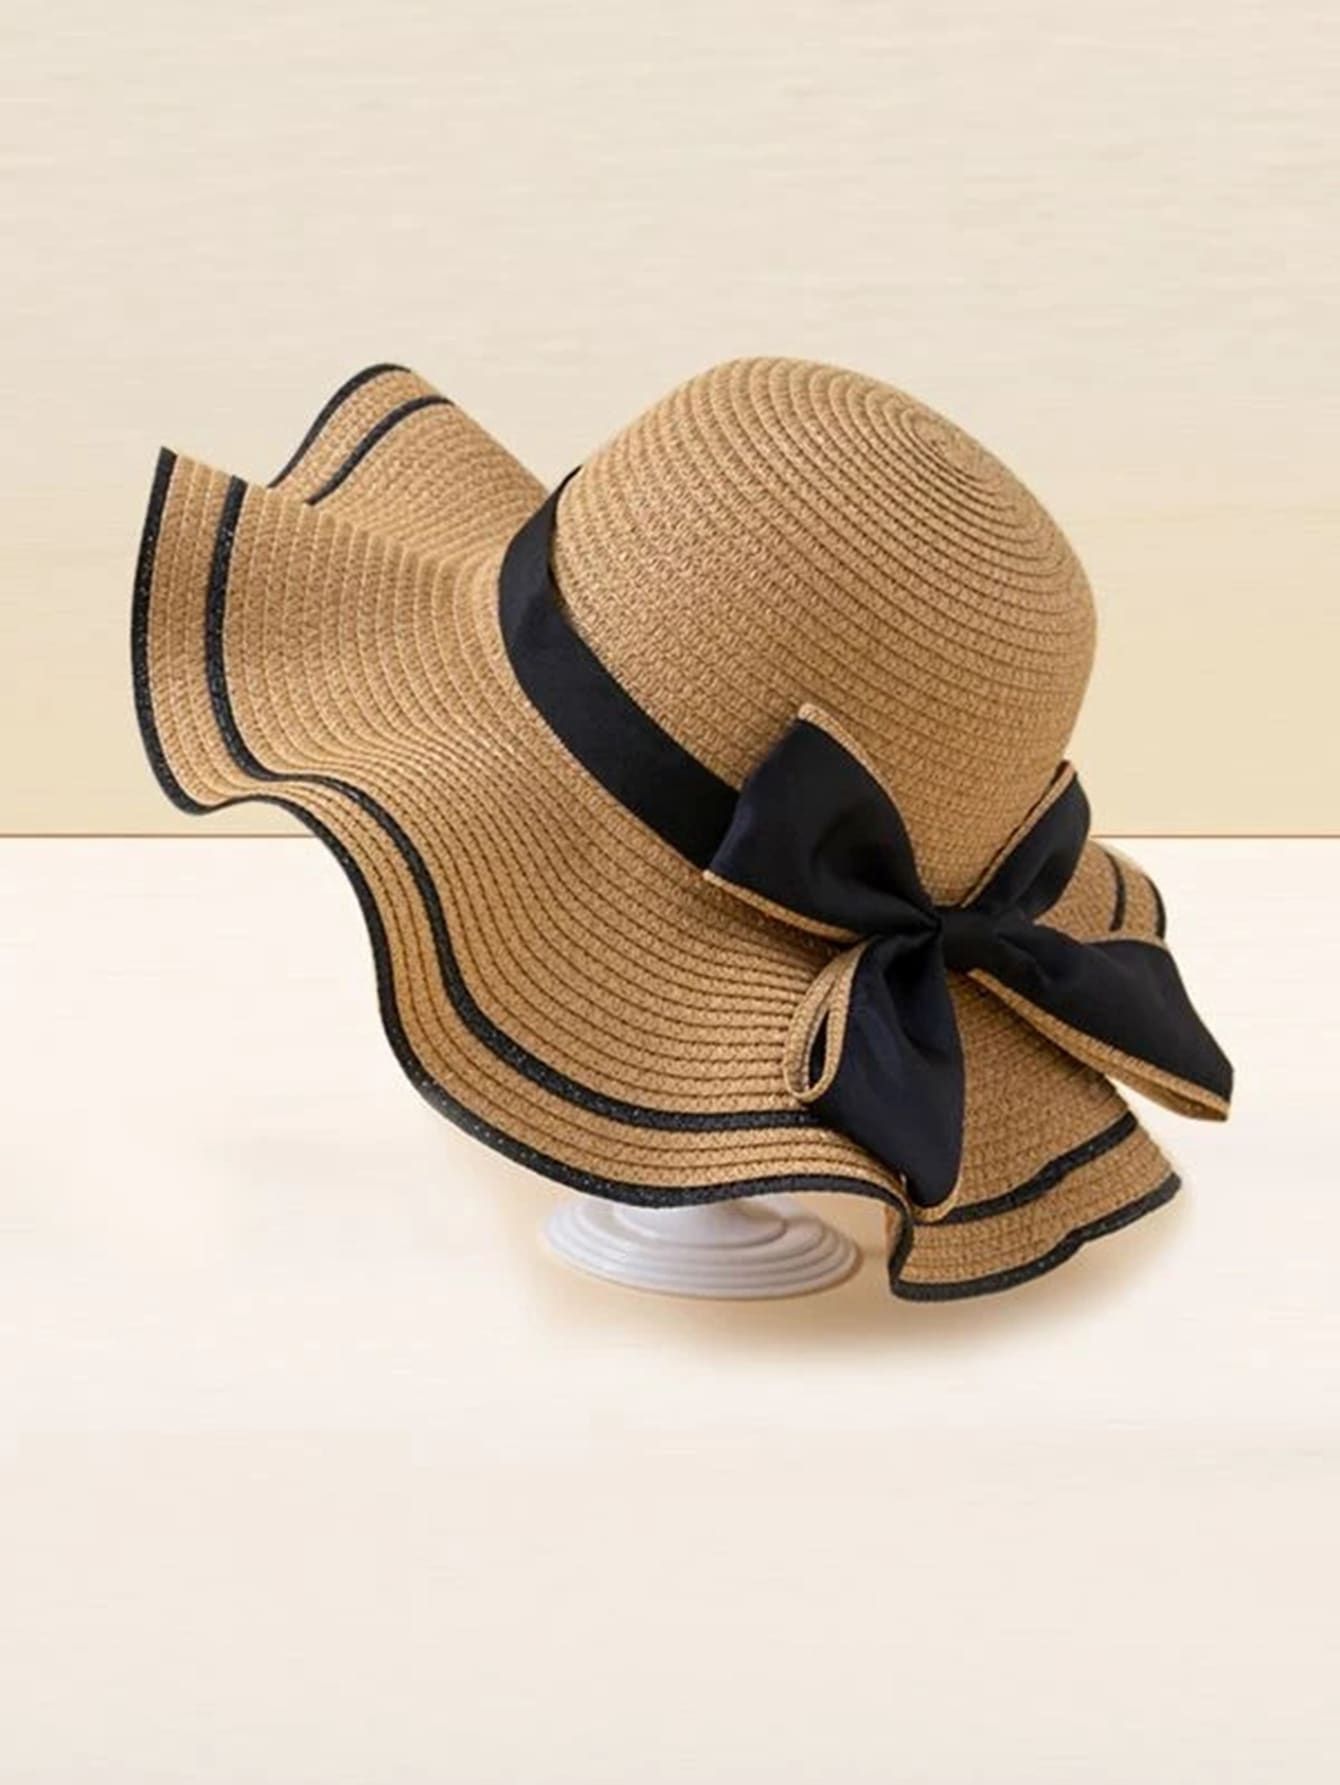 Shield Yourself from the Sun with Stylish Beach Hats